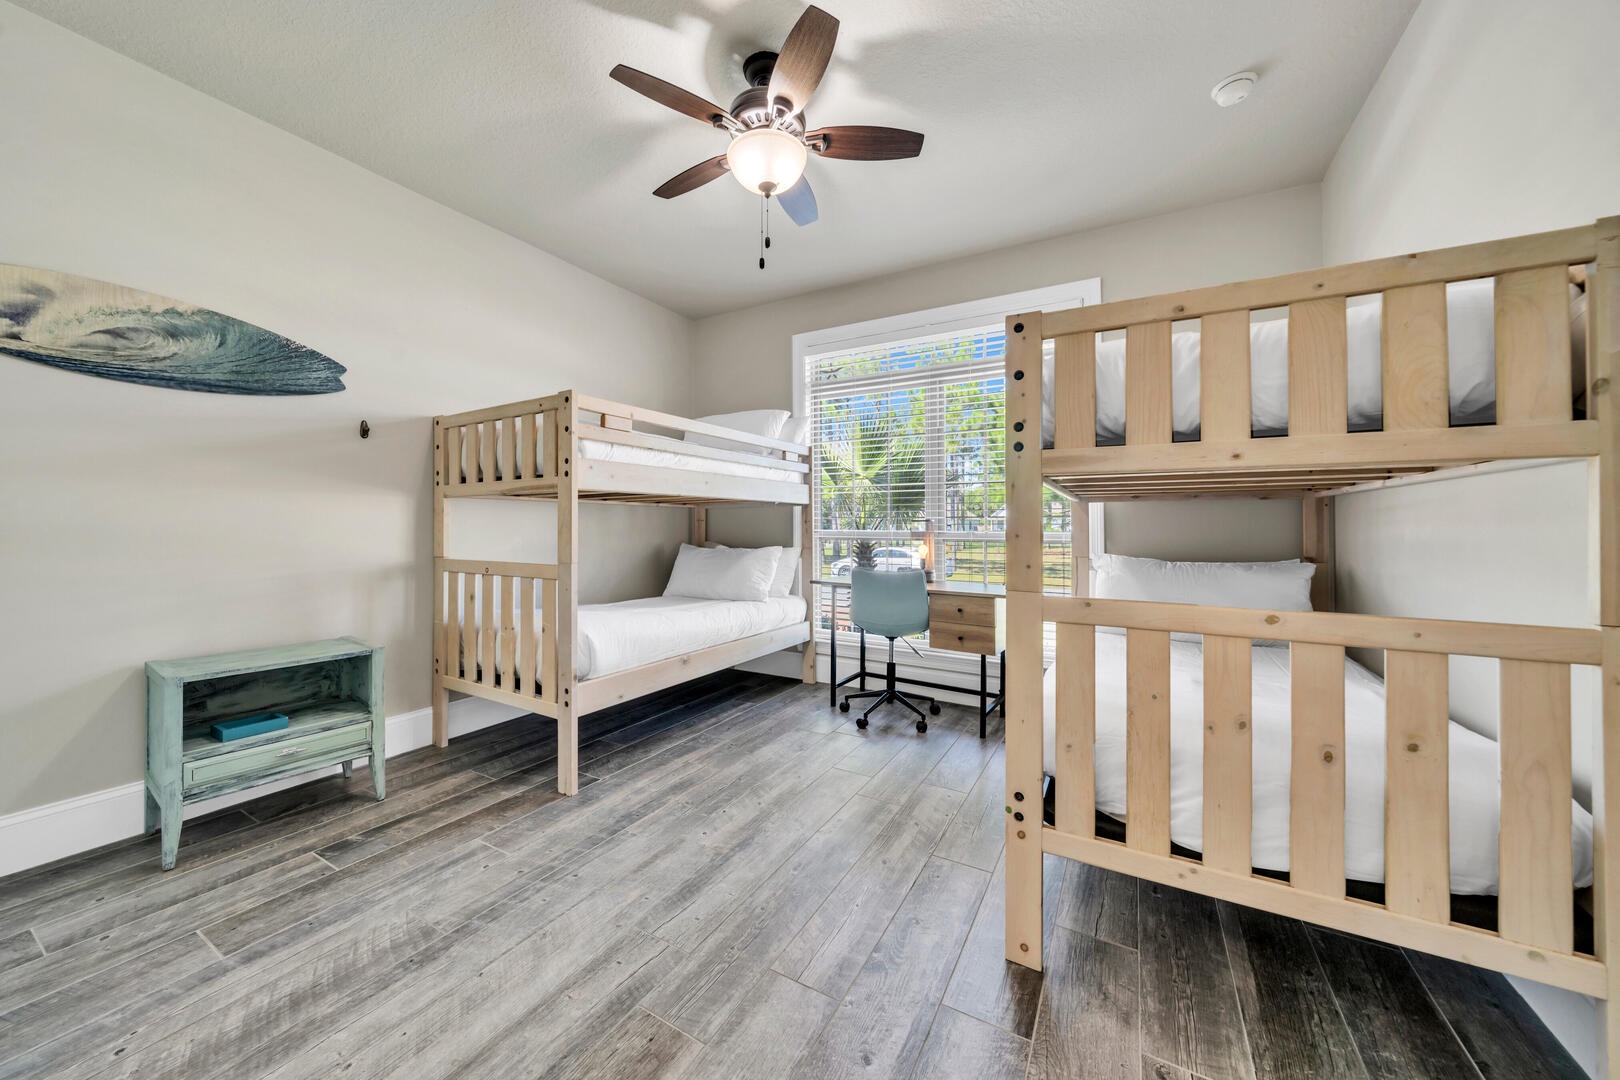 The bunk room features two twin bunks and a writing desk!